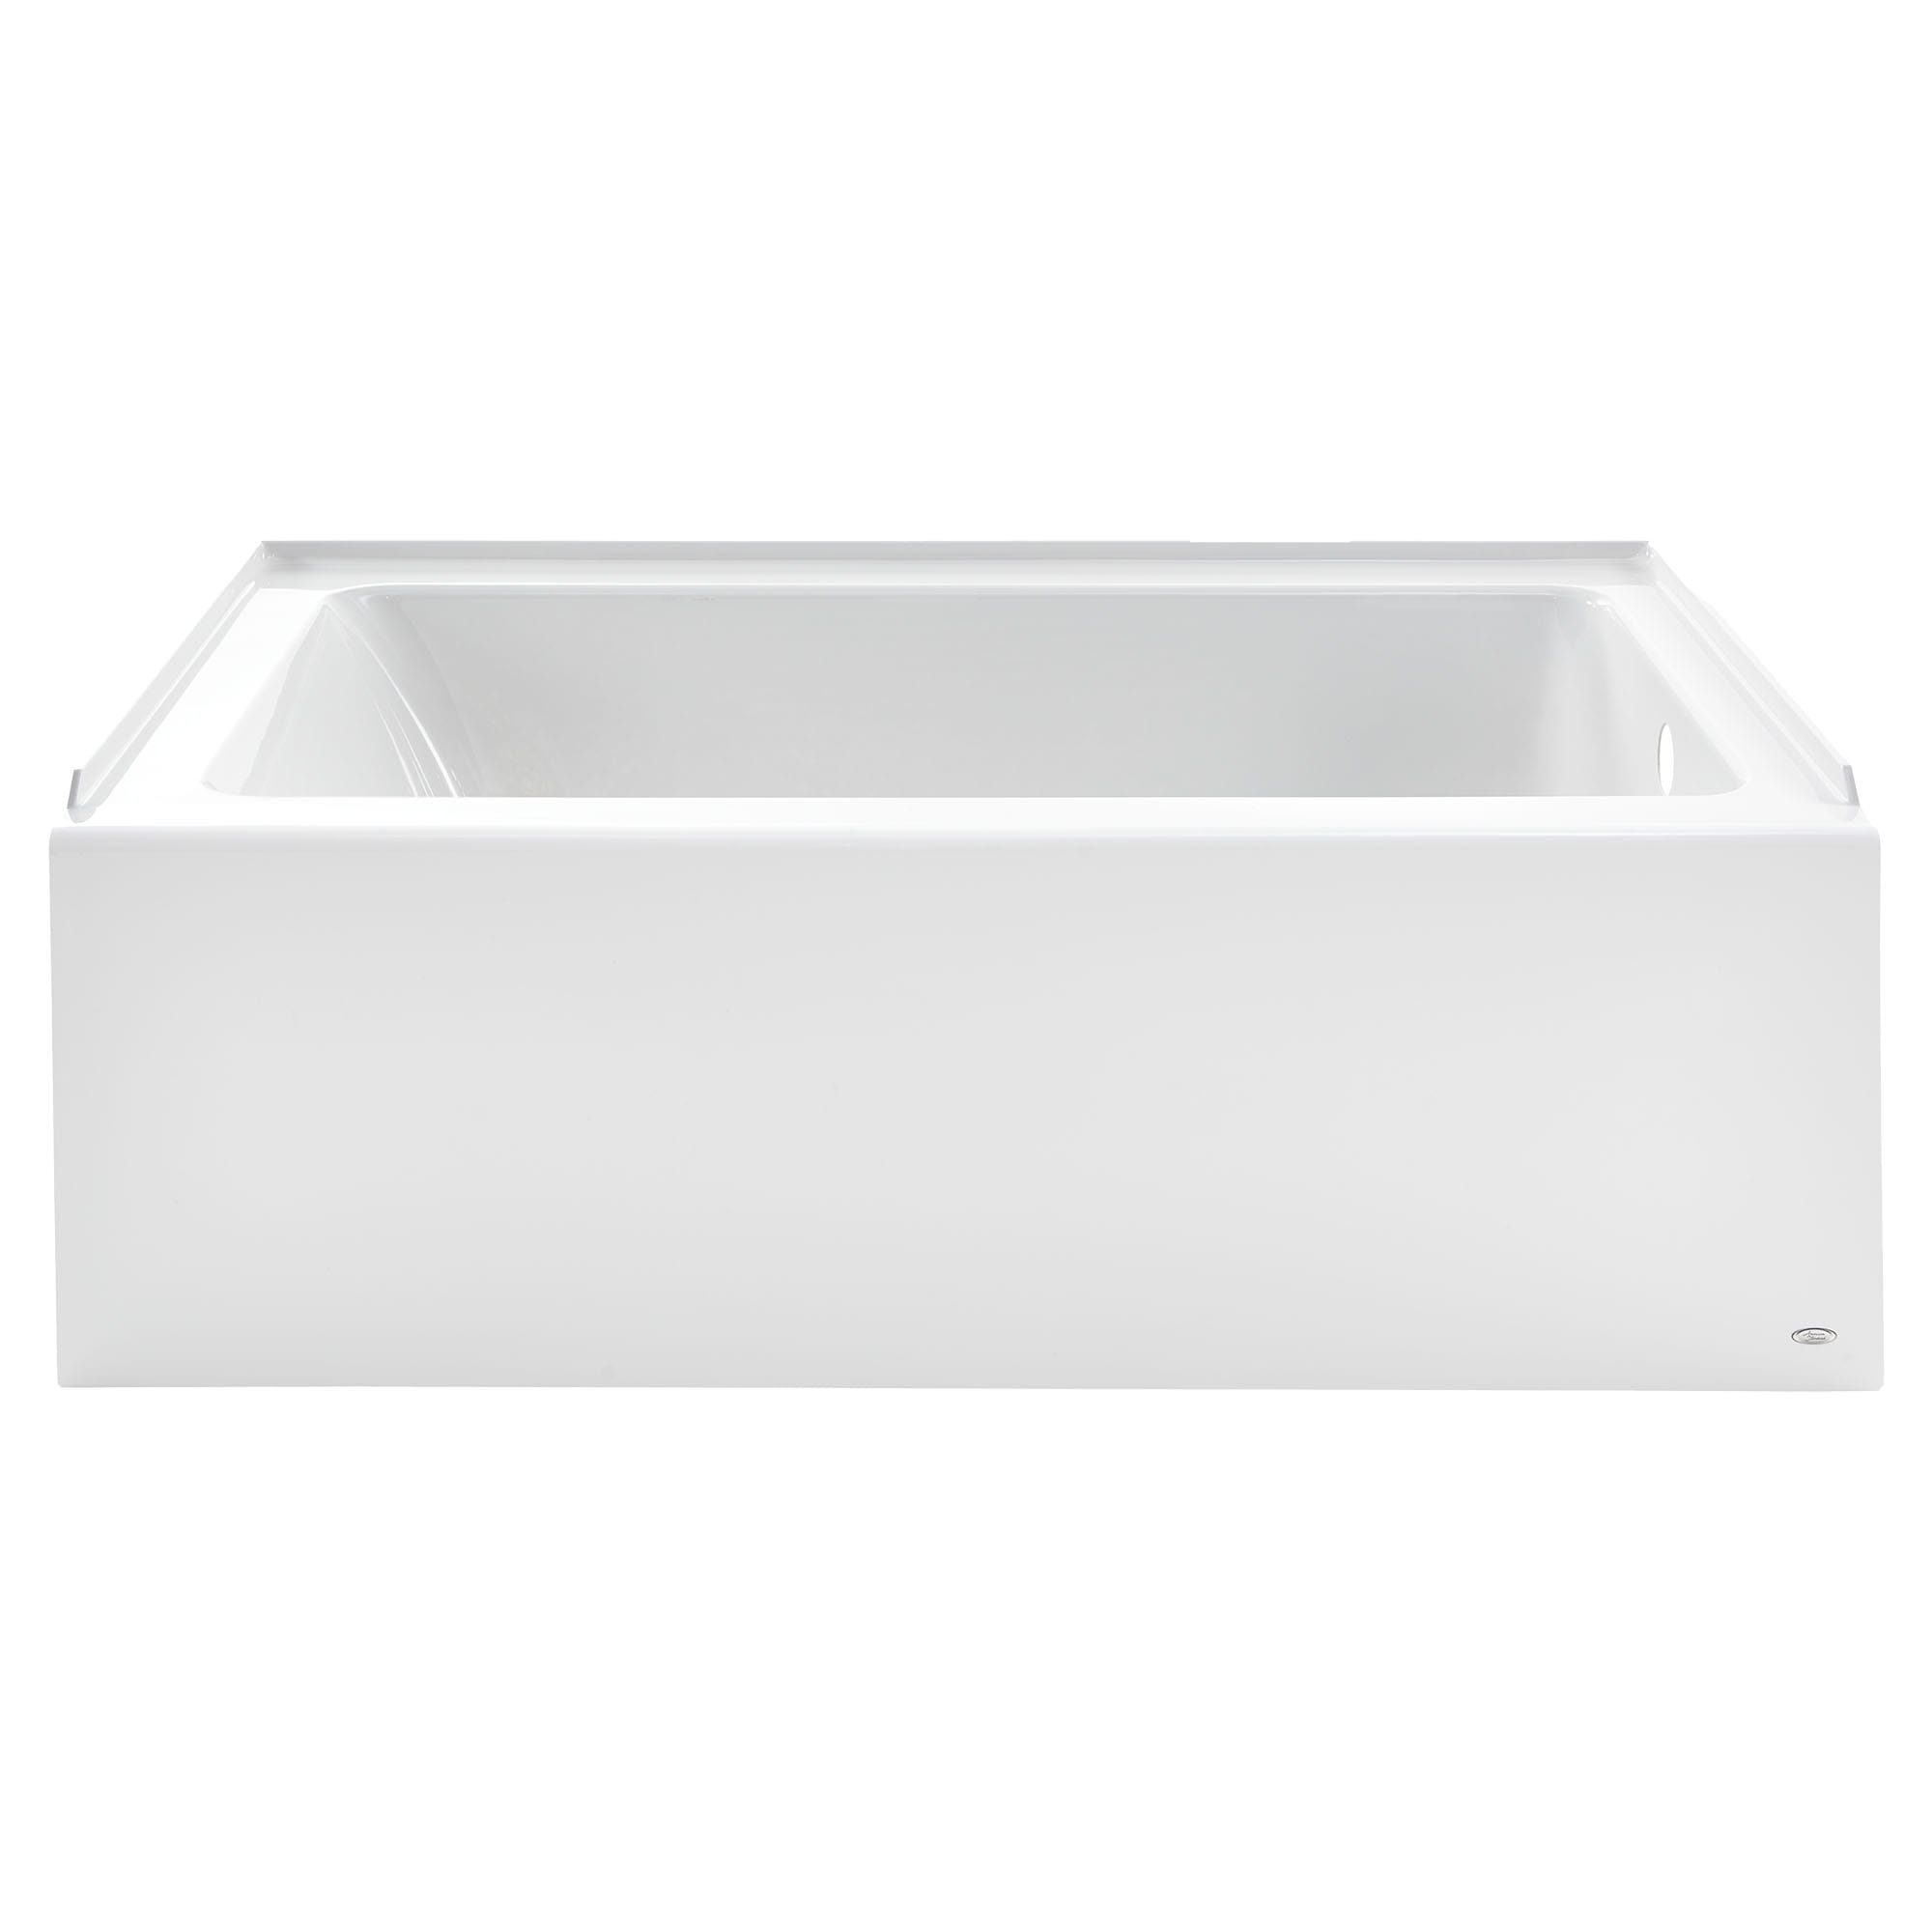 Studio® 60 x 32-Inch Integral Apron Bathtub With Right-Hand Outlet